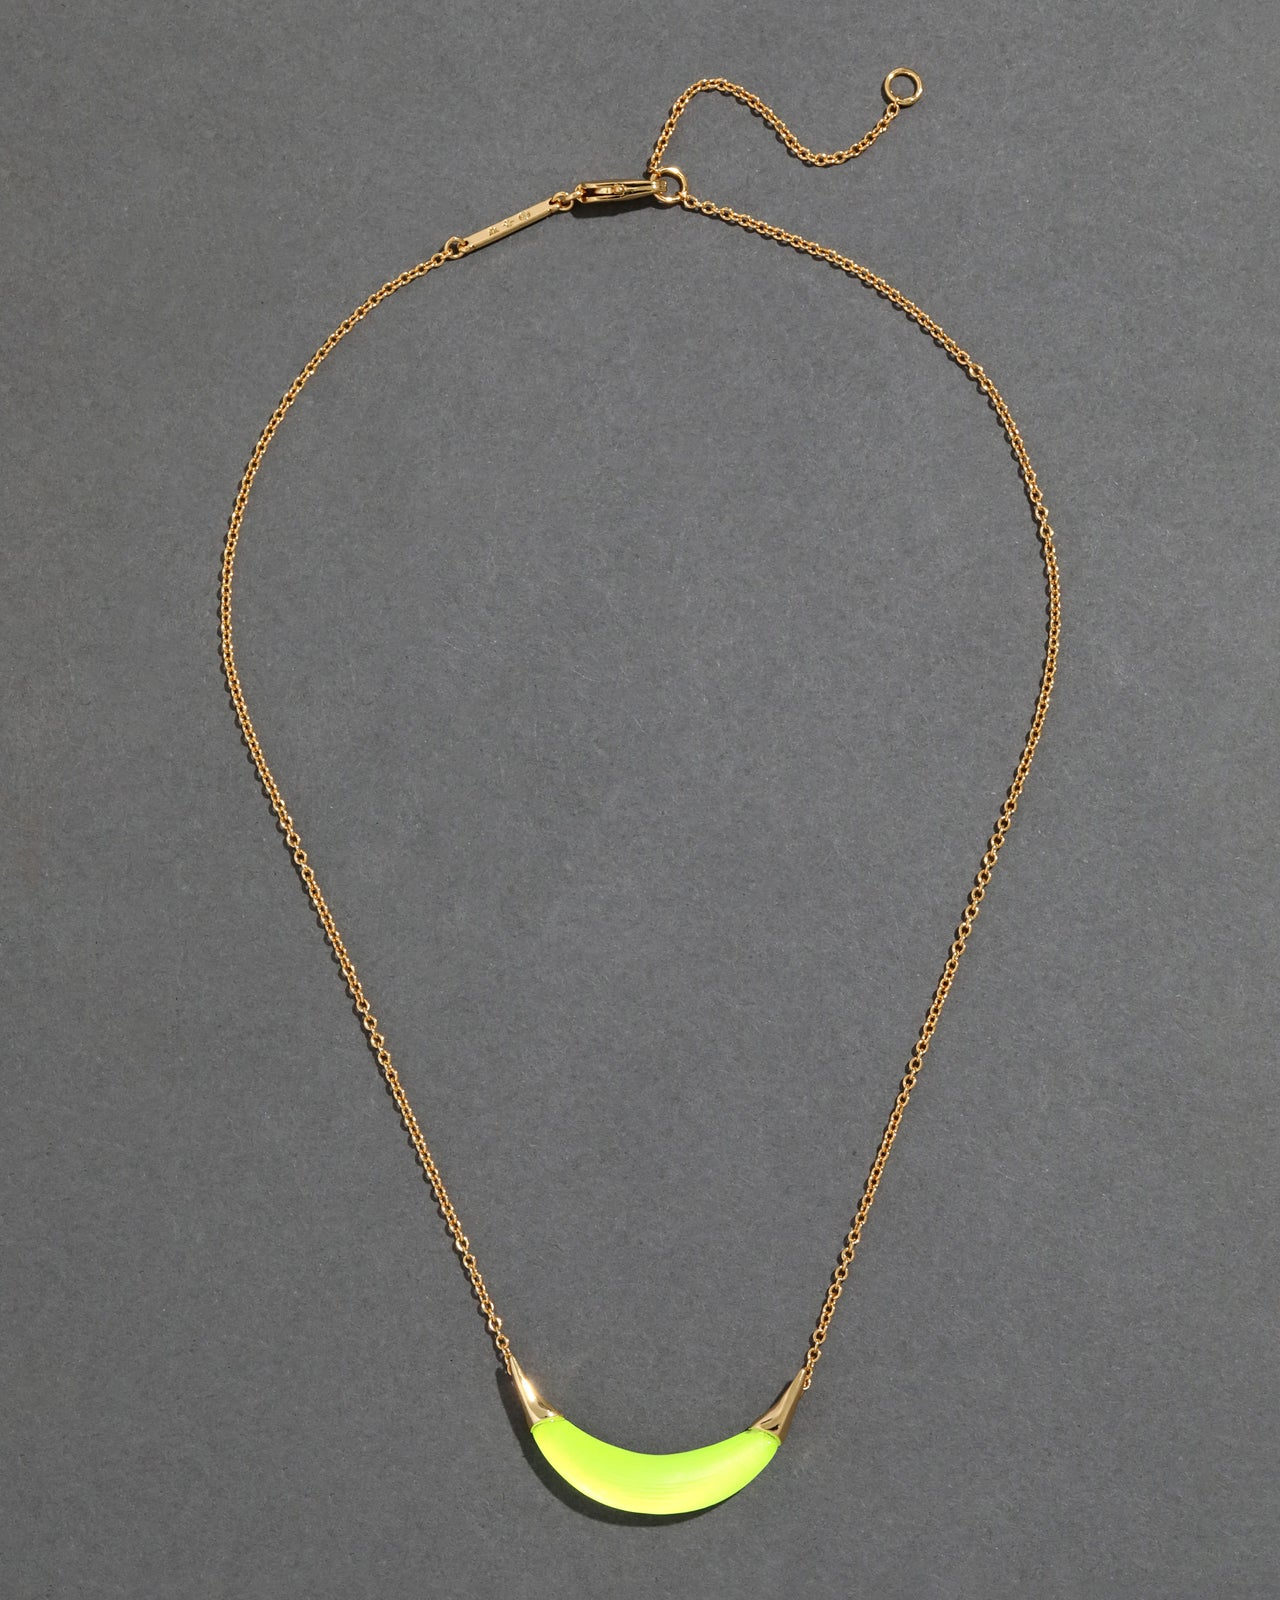 Gold Capped Crescent Lucite Necklace- Neon Yellow - Photo 2